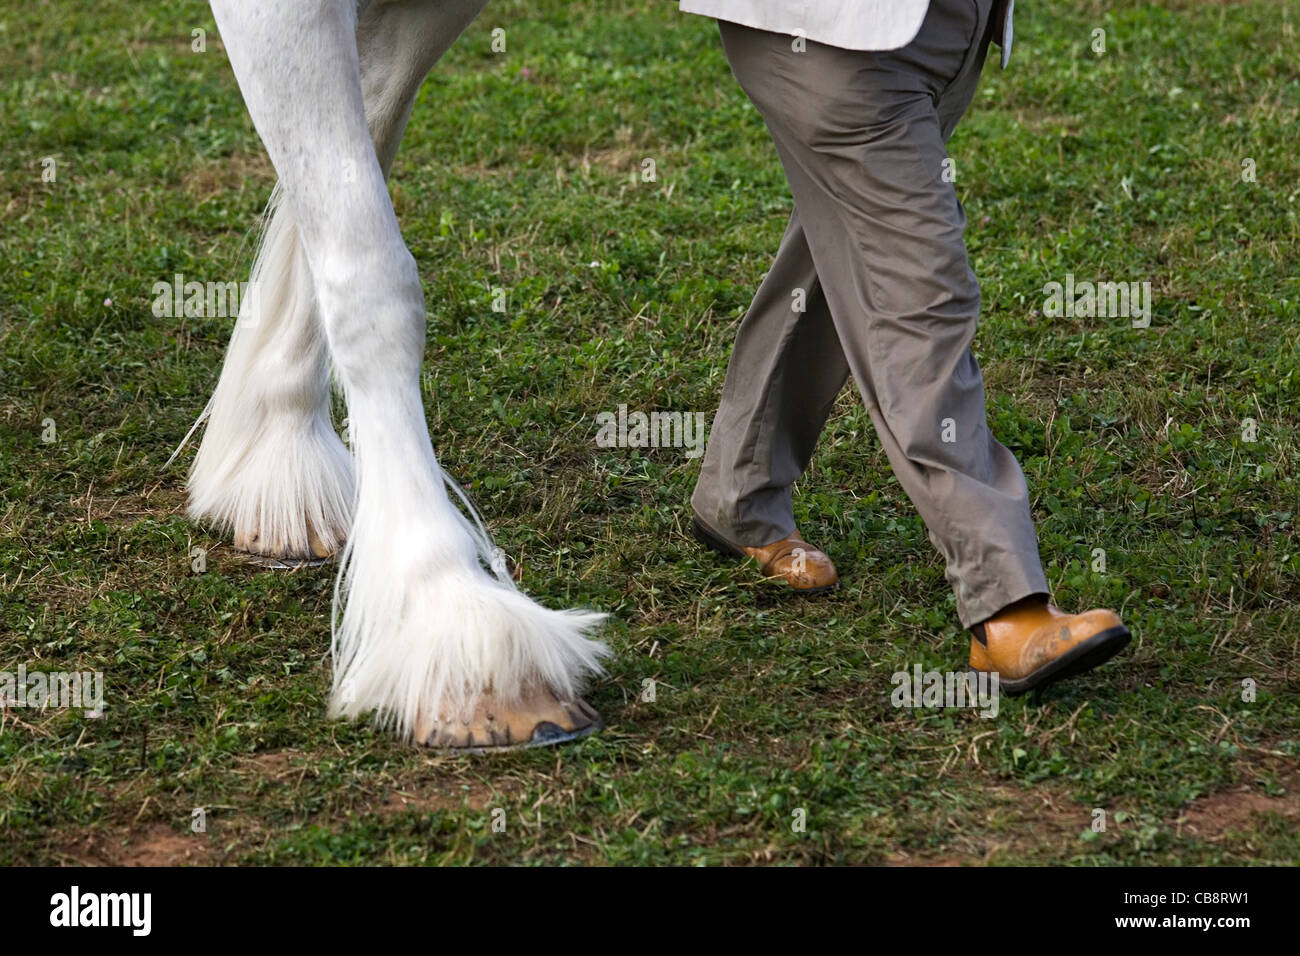 Man and Shire Horse Legs Walking in Unison at Country Show Stock Photo